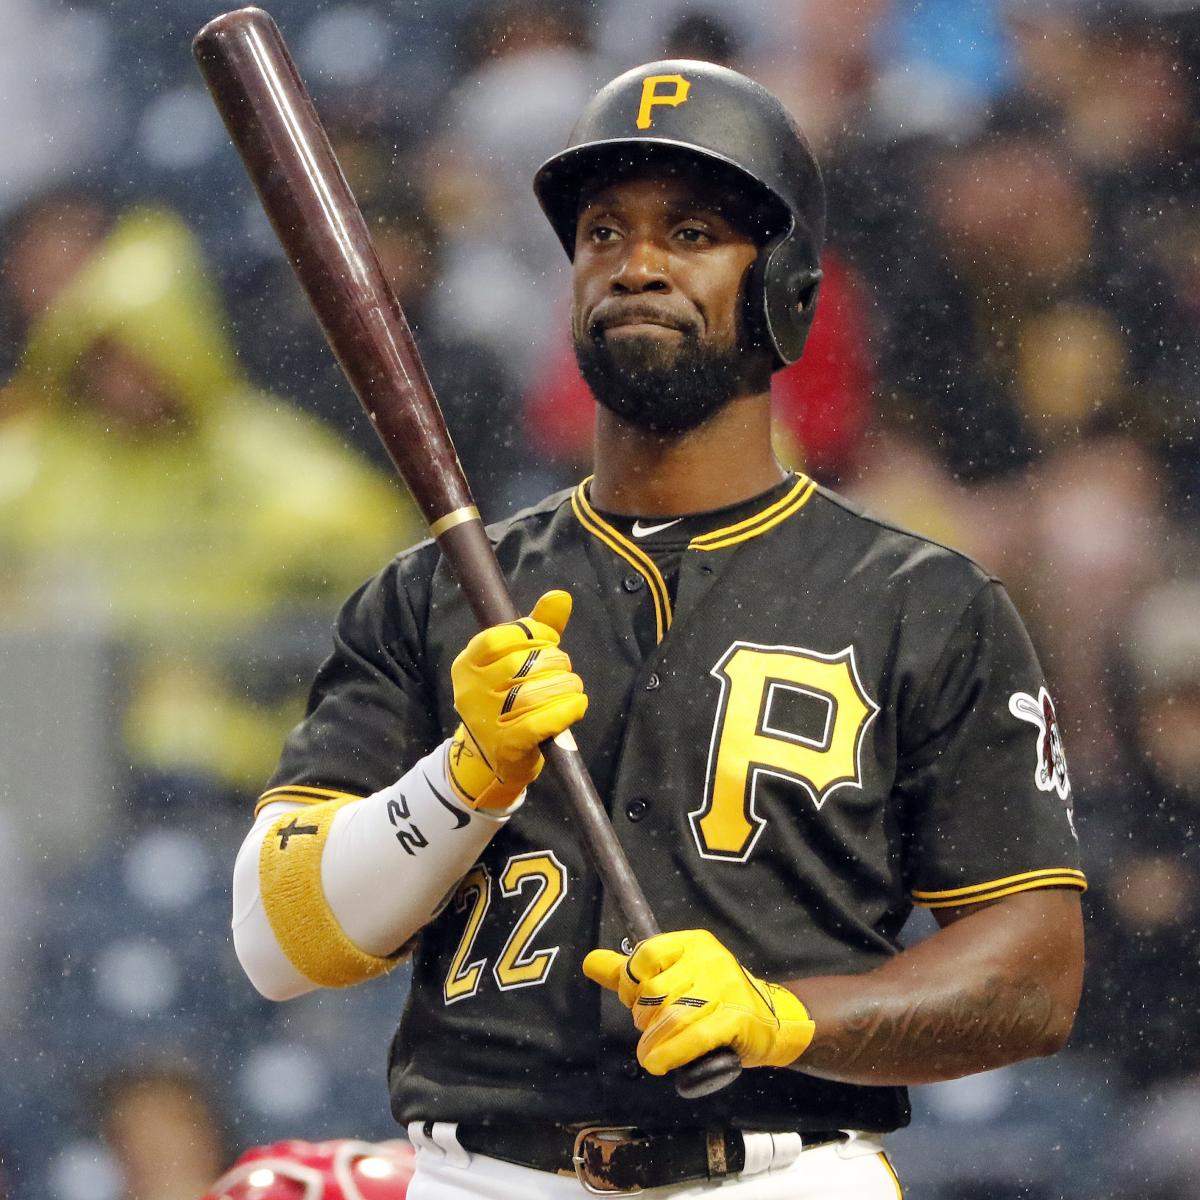 Pittsburgh Pirates on X: Today we lost a member of our Pittsburgh